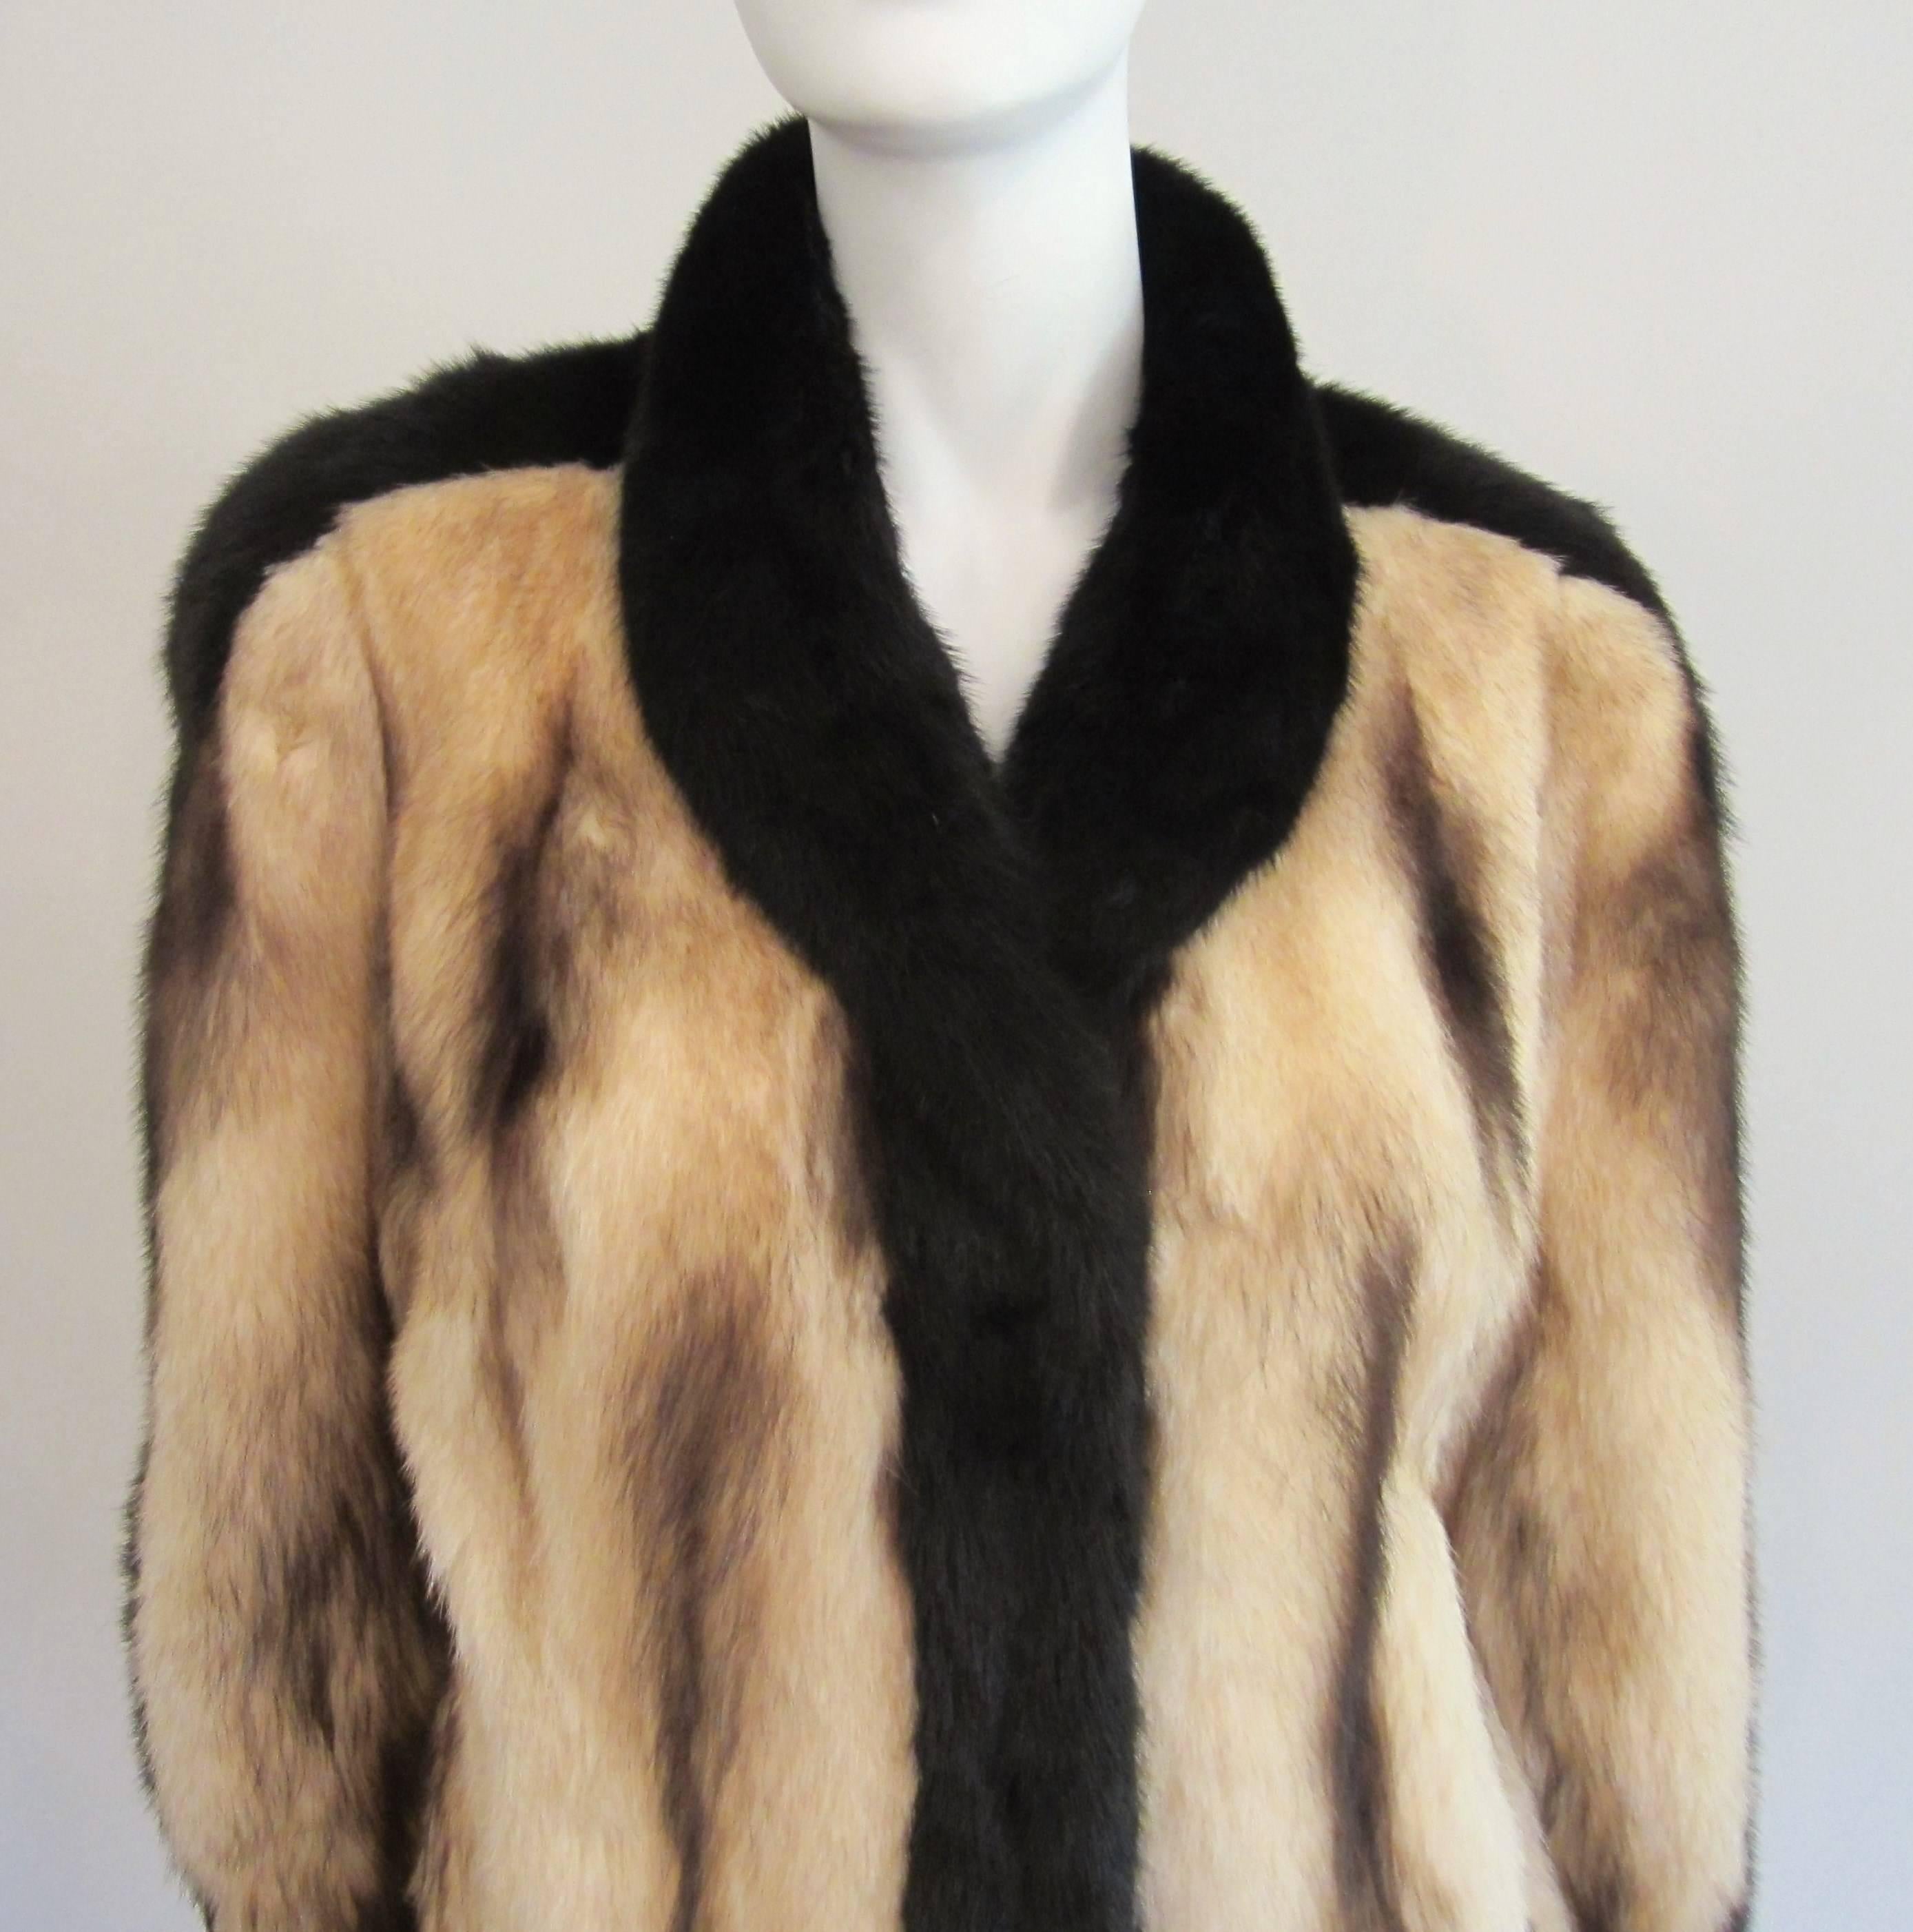 Stunning Fitch jacket with Mink accents. The jacket measures up to a 40 inch bust--- up to 44 inch waist --- length 31 inches down the back. This can certainly be worn by both a man or woman. Banded cuff, french hem, 3 hook closure and 2 slit